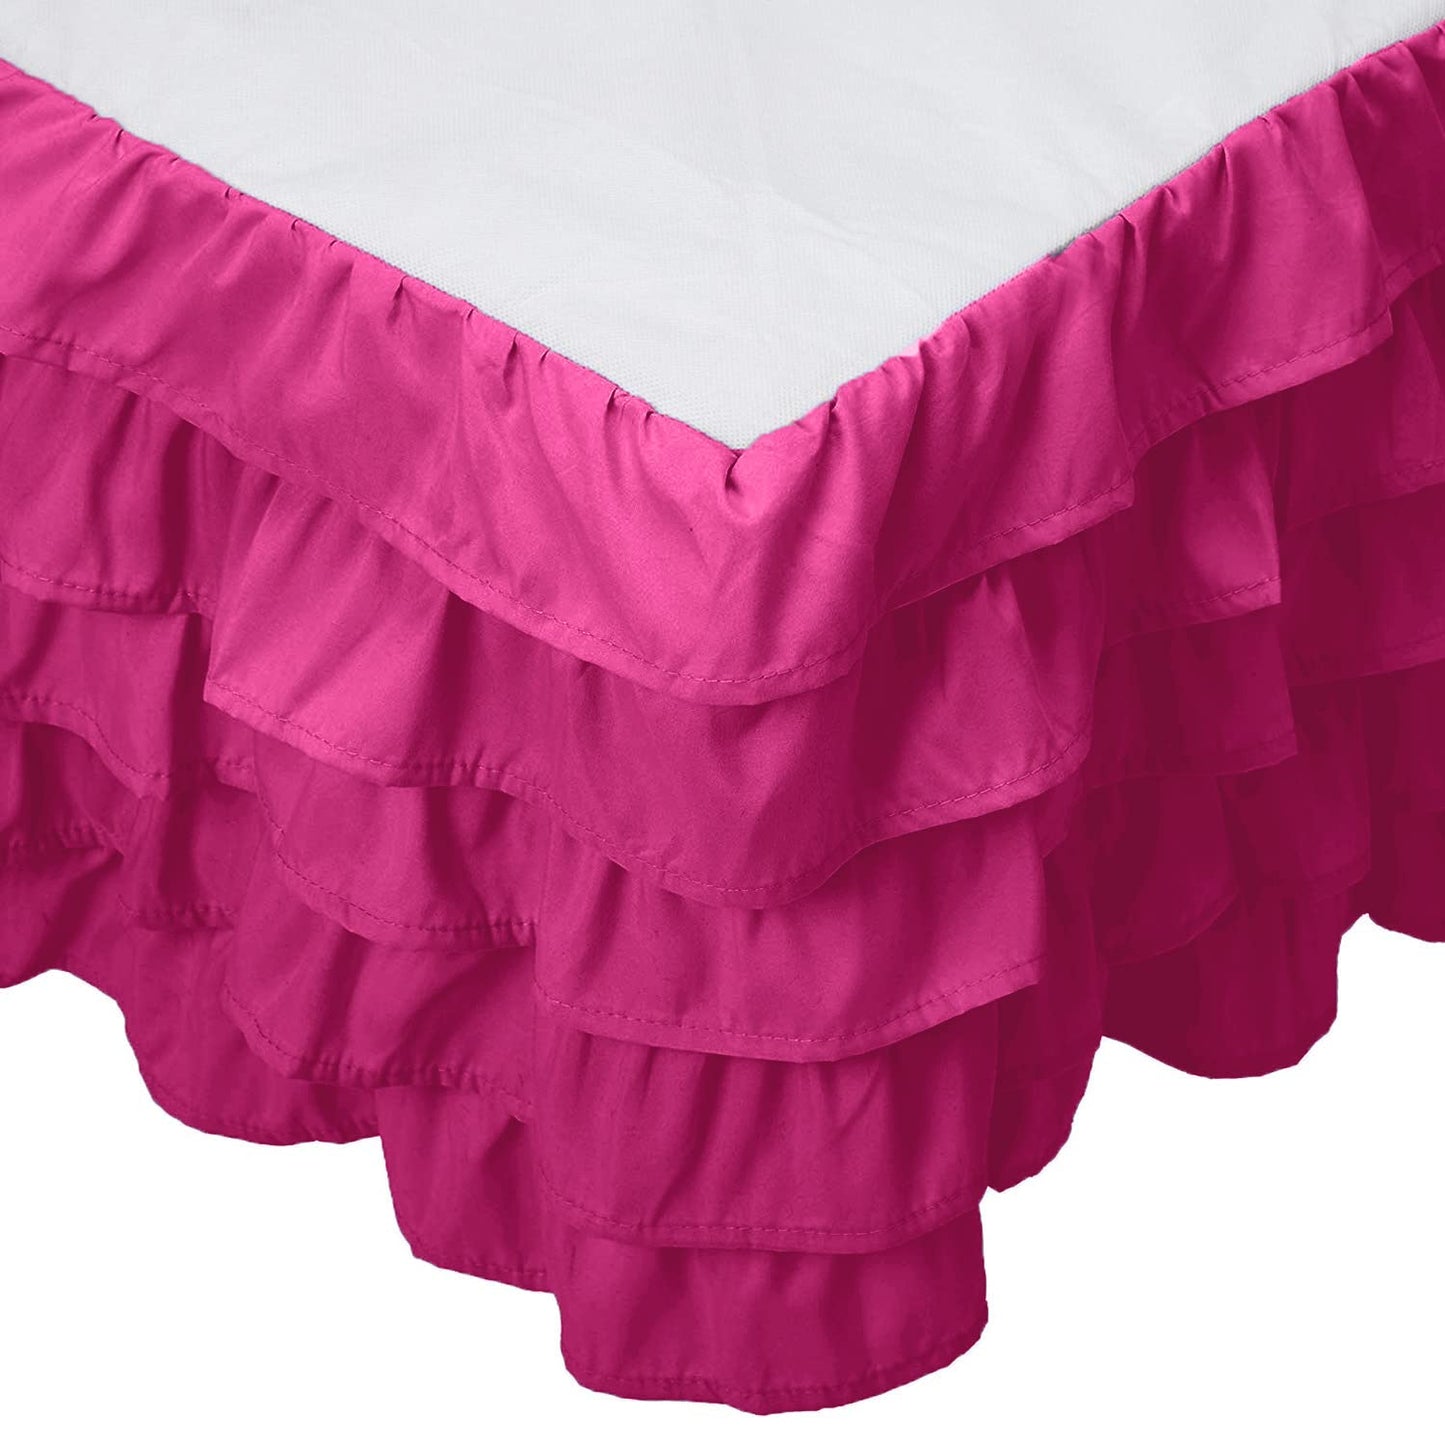 Elegant Comfort Leila Collection Multi-Ruffle Bed Skirt, 1500 Thread Count Egyptian Quality, Easy Fit Dust Ruffle, 15 inch Drop, Wrinkle and Stain Resistant, MultiRuffle, Queen, Hot Pink